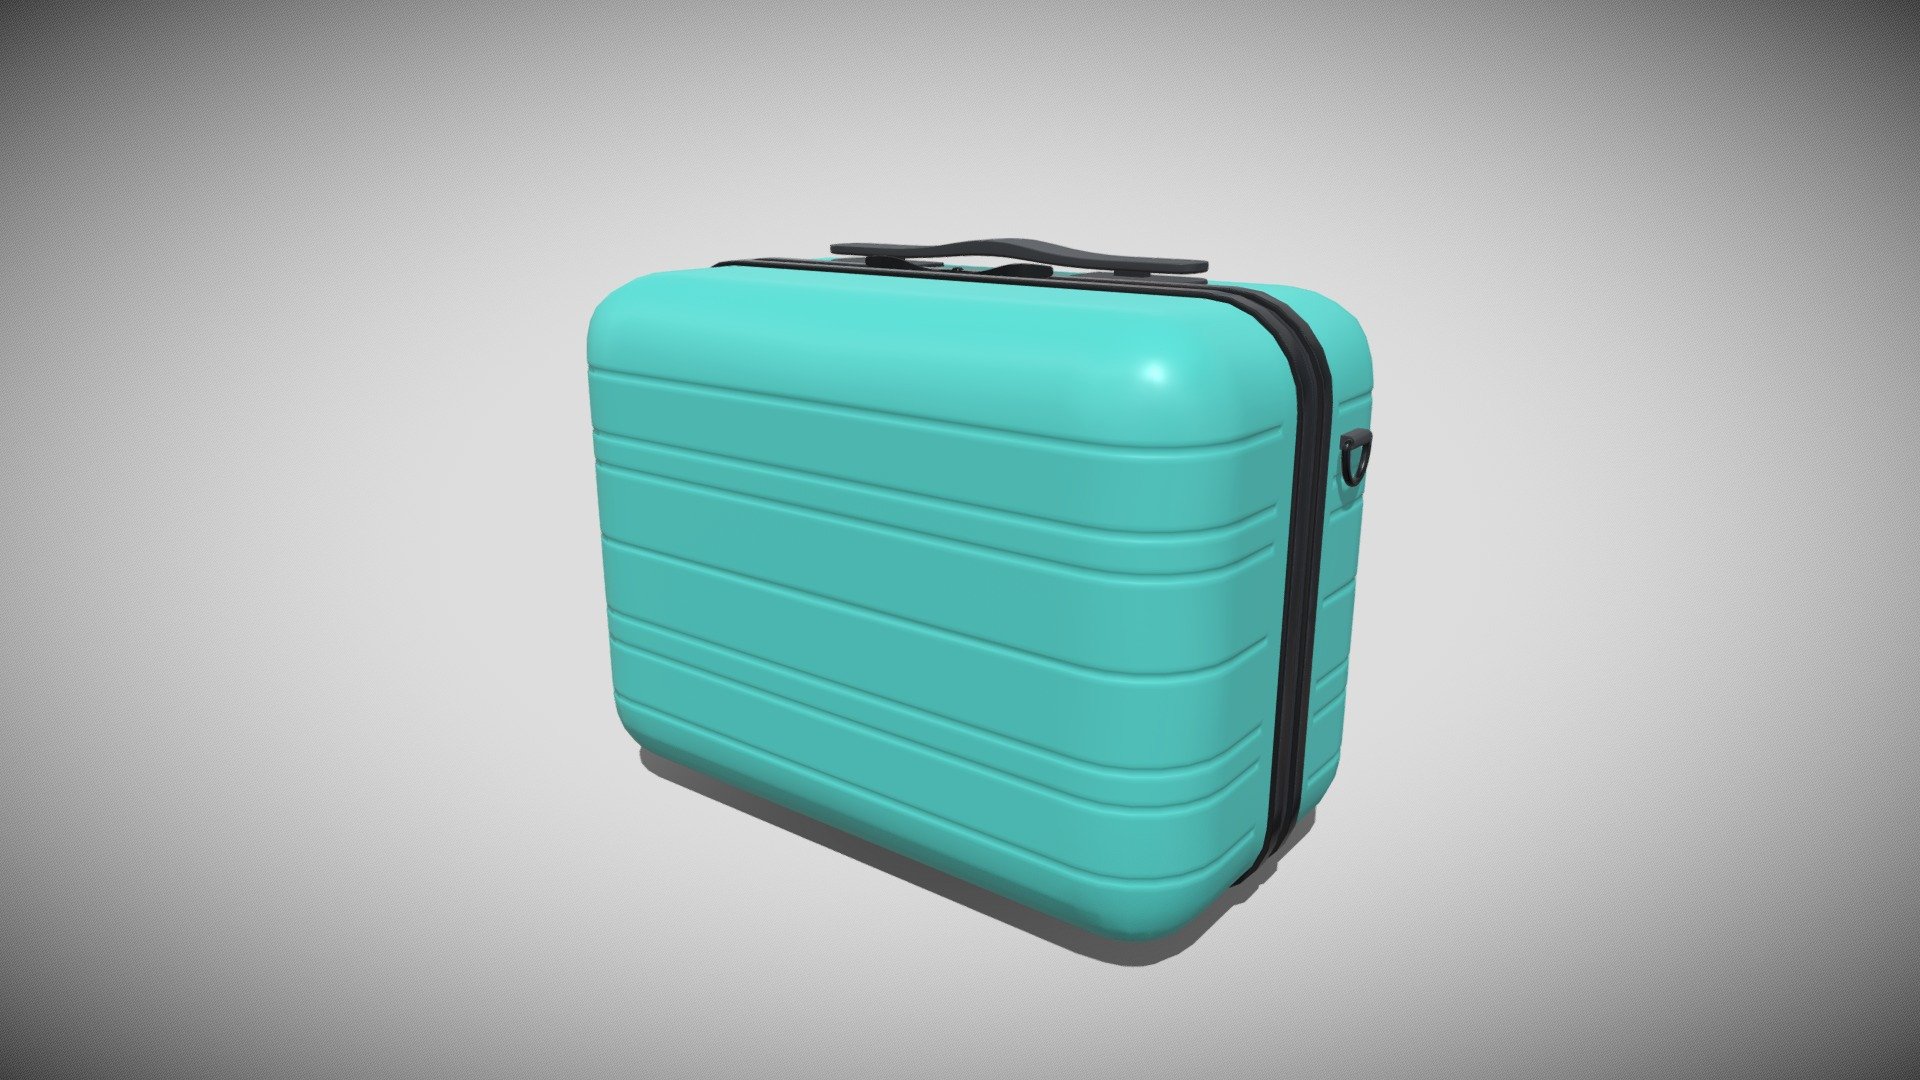 Detailed model of a Vanity Case, modeled in Cinema 4D.The model was created using approximate real world dimensions.

The model has 10,312 polys and 10,353 vertices.

An additional file has been provided containing the original Cinema 4D project files with both standard and v-ray materials, textures and other 3d export files such as 3ds, fbx and obj 3d model